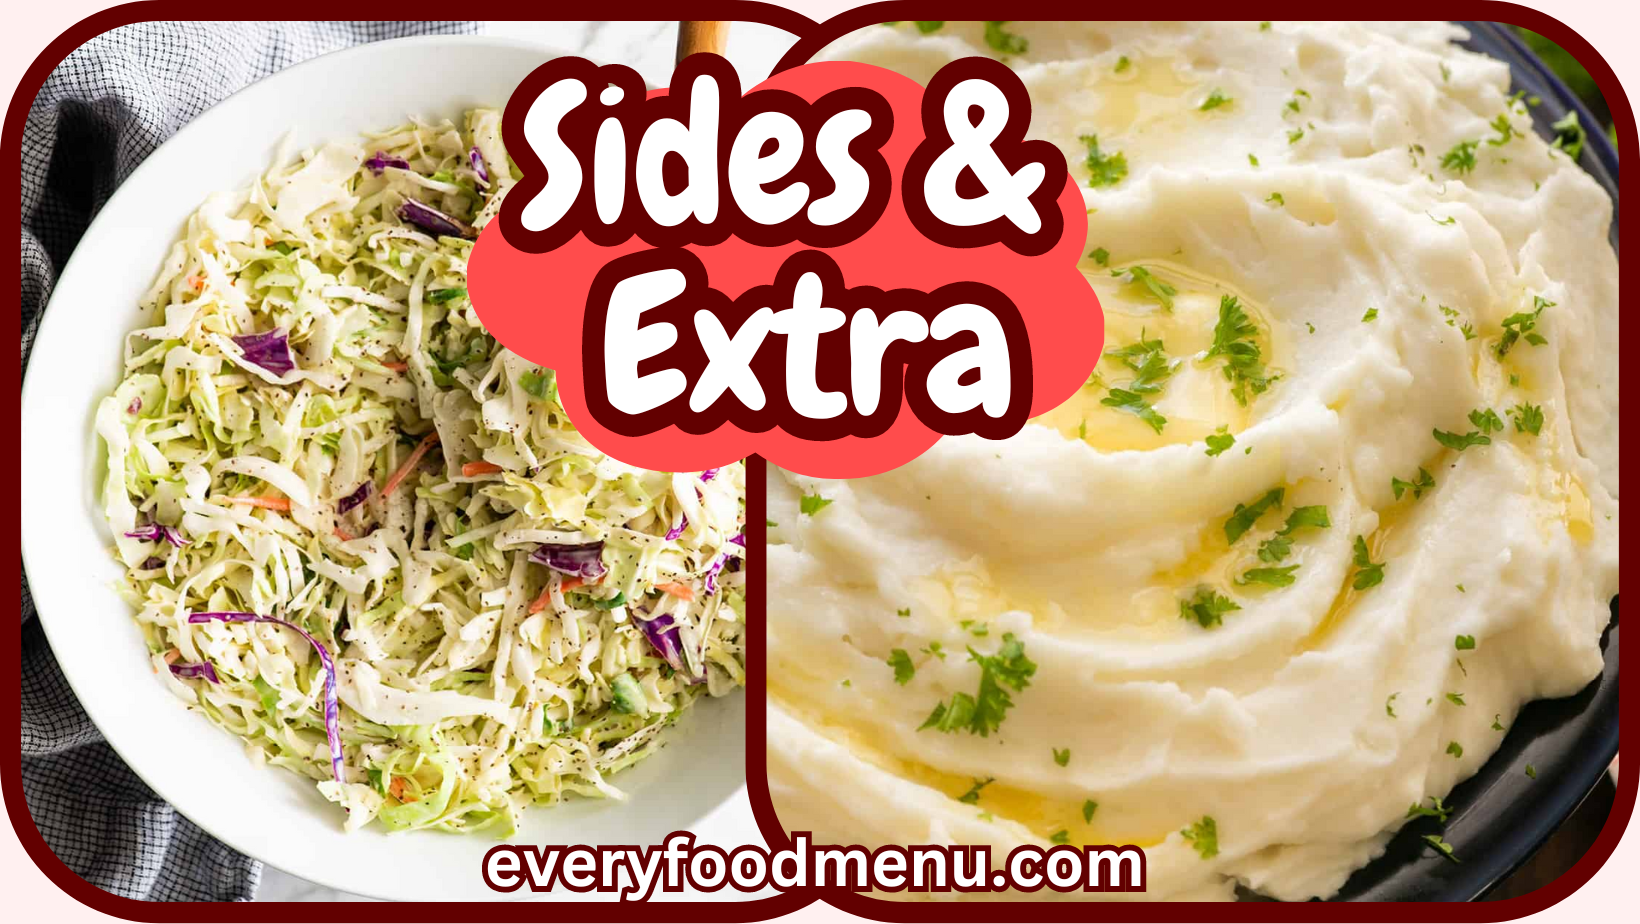 Sides & Extra